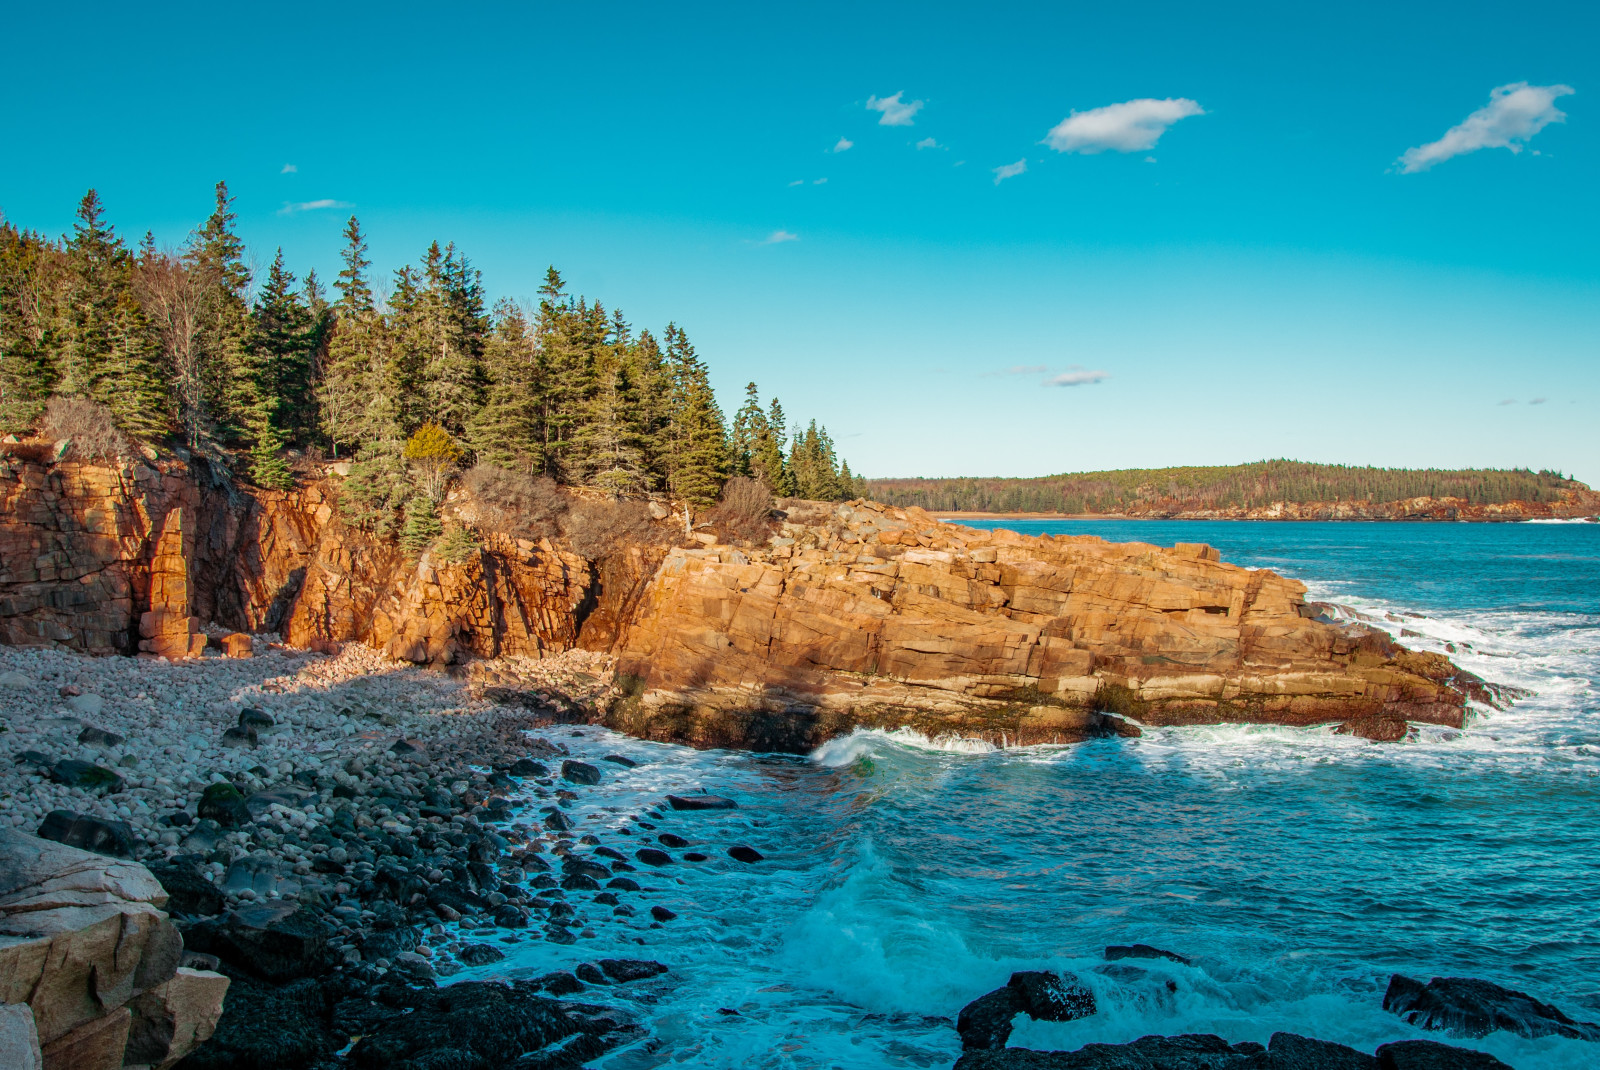 Body of water next to rocky coastline and trees with blue skies during daytime